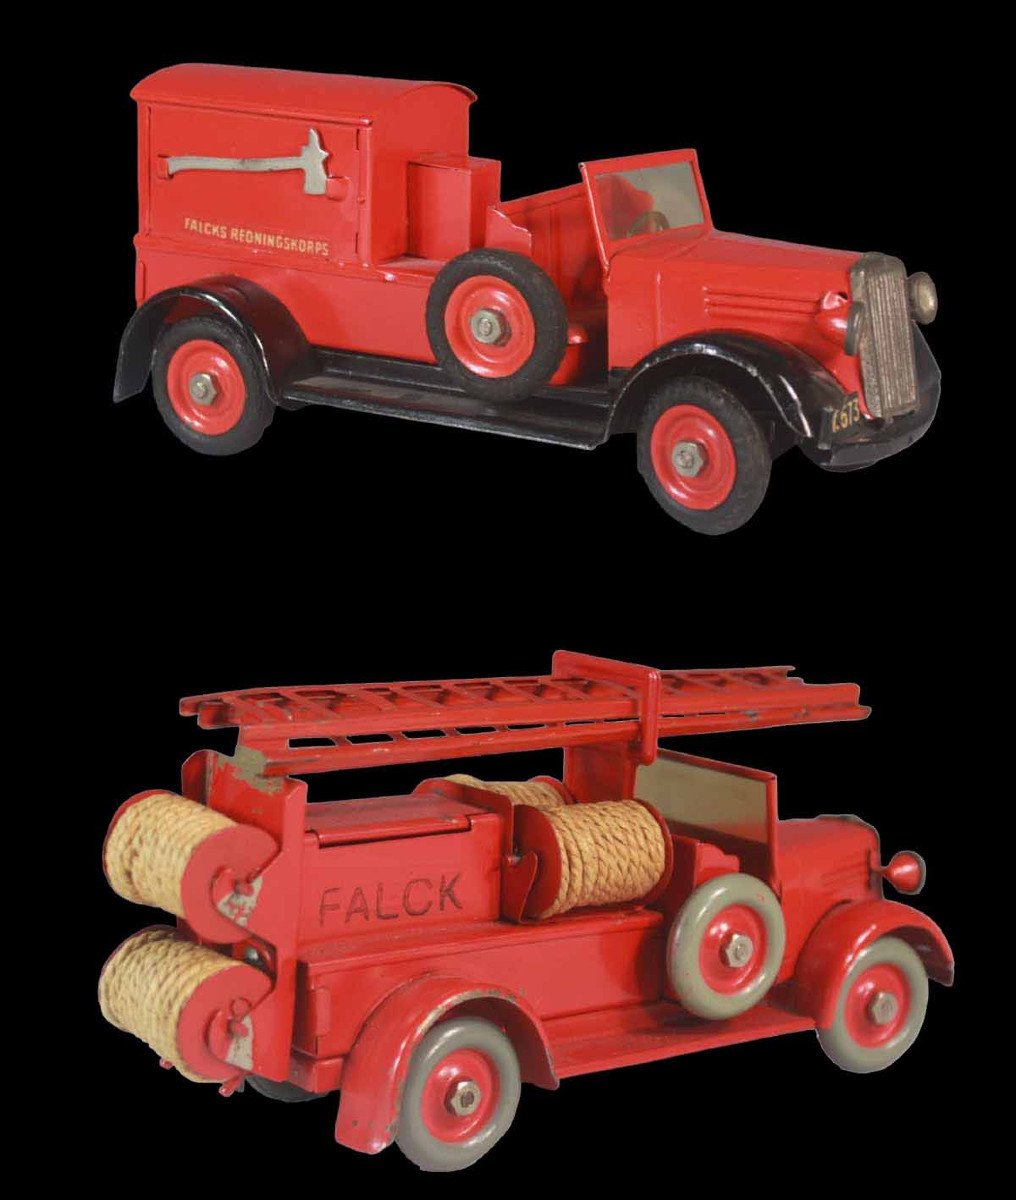 2 Tekno Firefighters Falk 1950 / Old Toy 